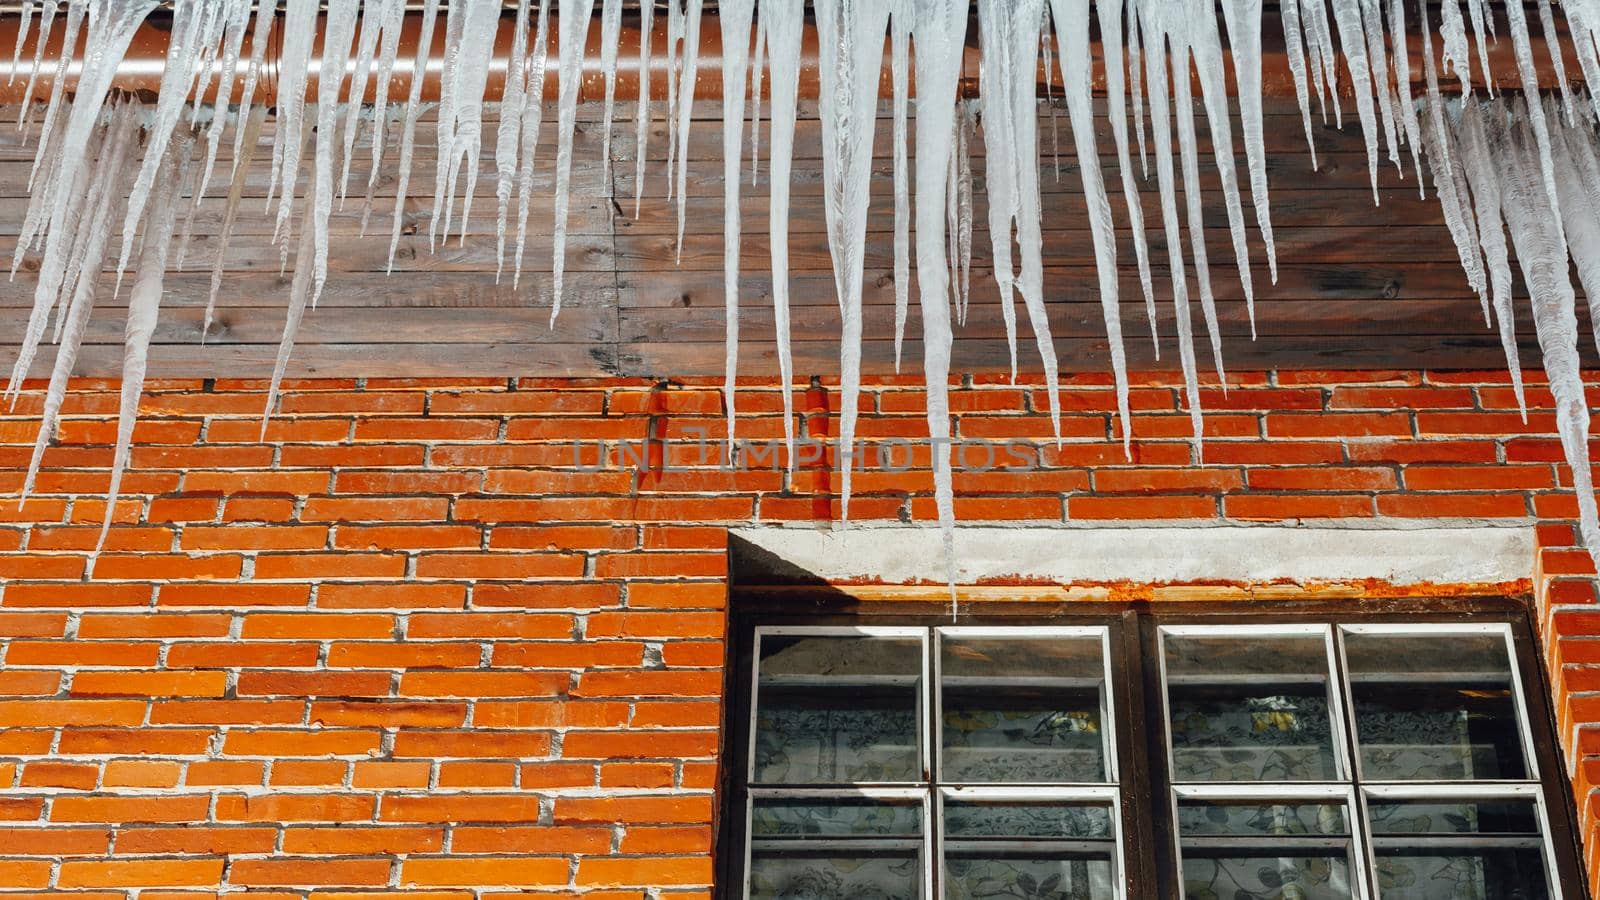 icicles lump above the window  by nikkytok